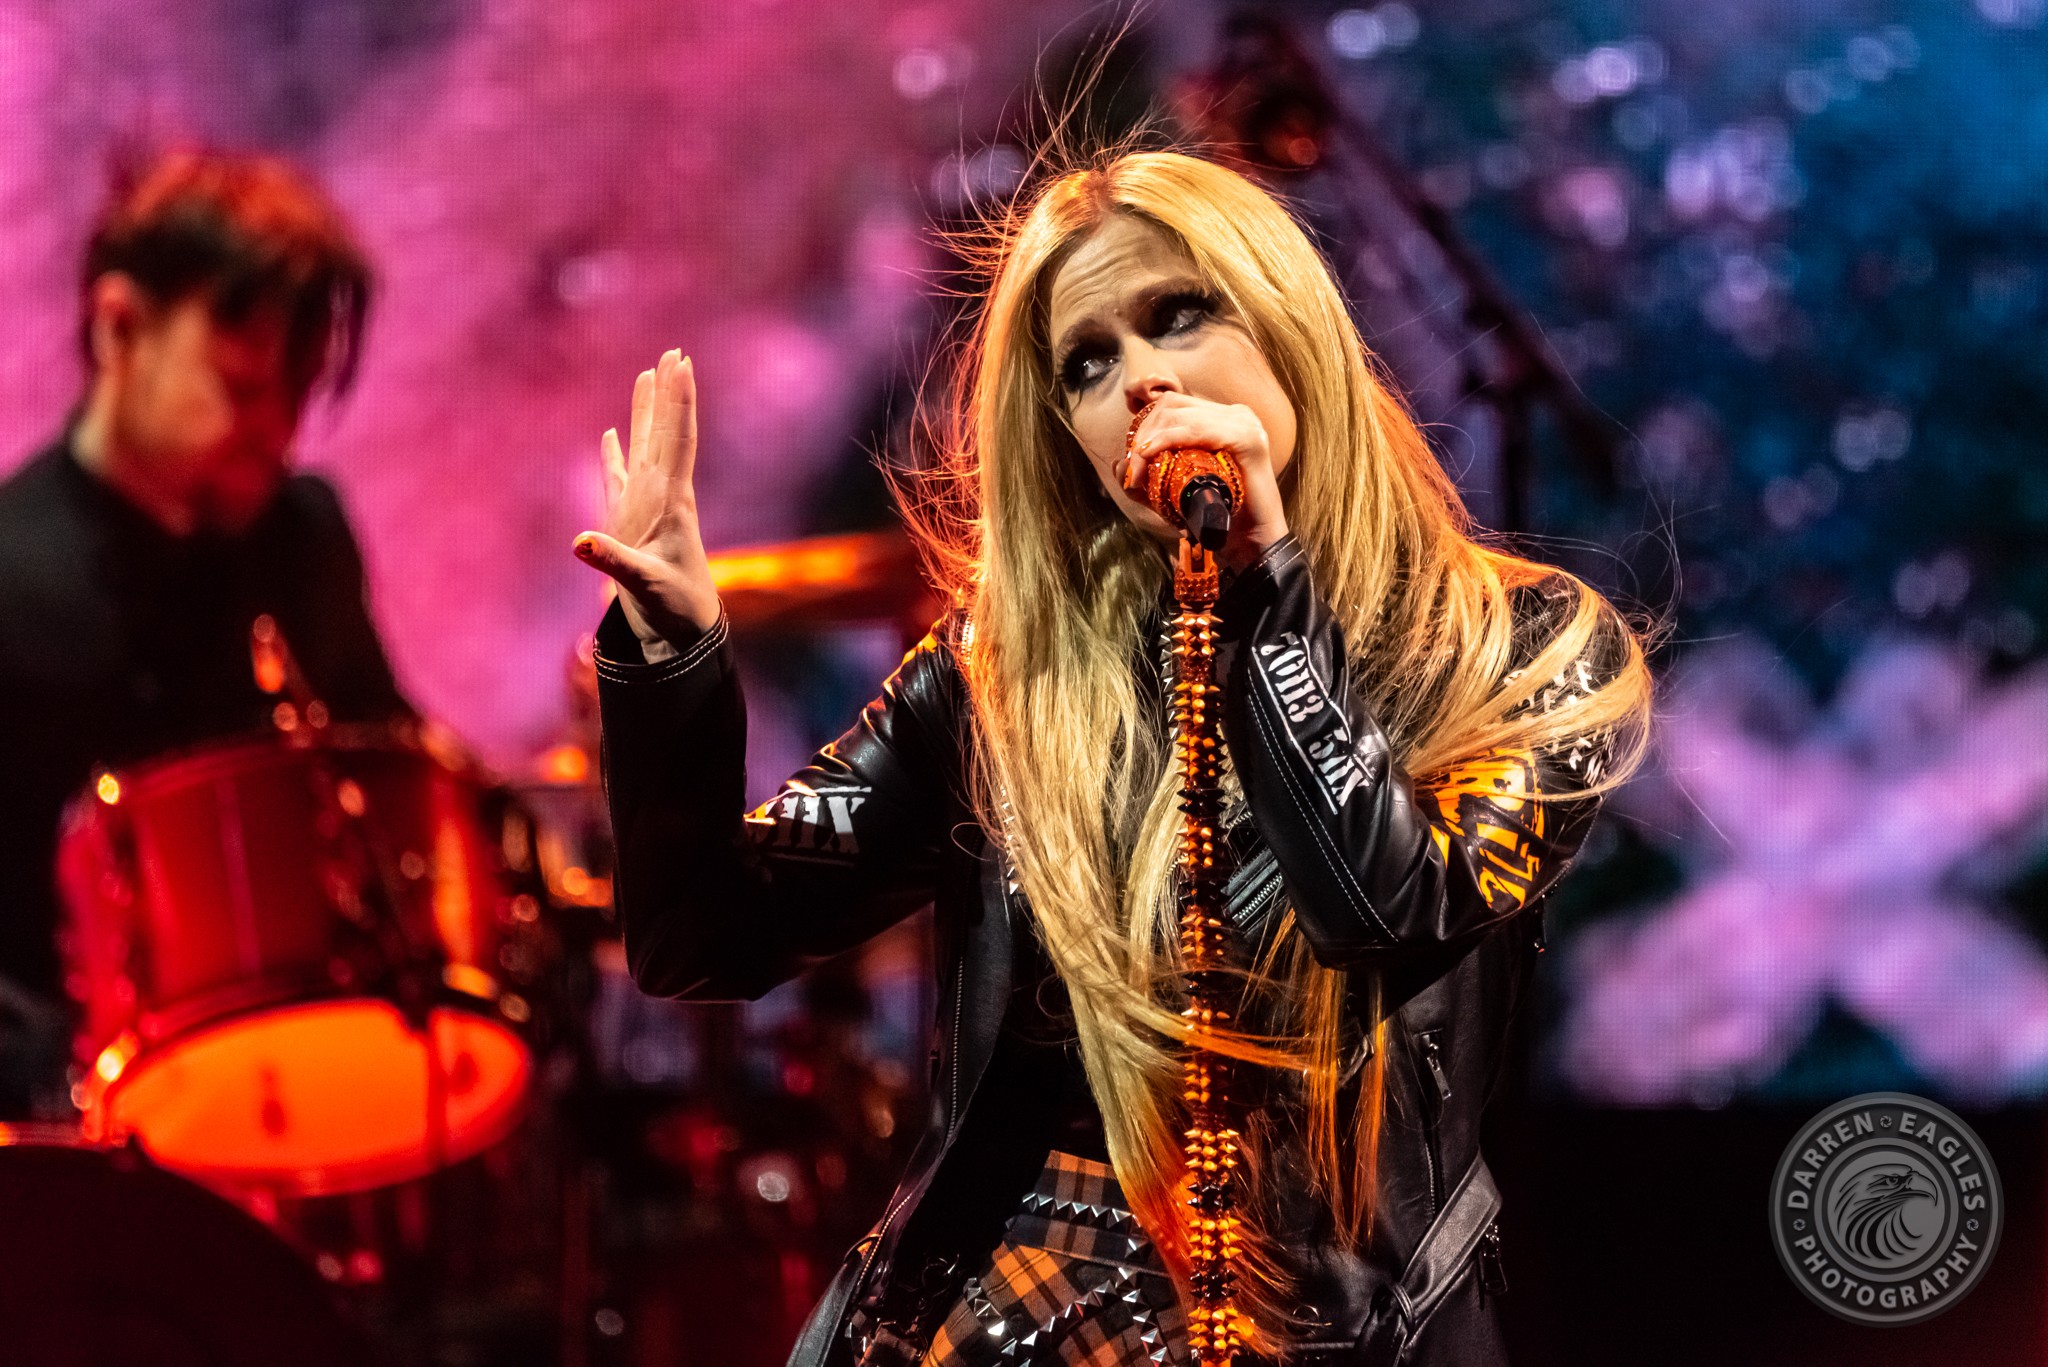 Avril Lavigne @ Casino Rama (Barrie, ON) on April 30, 2022, by Darren Eagles